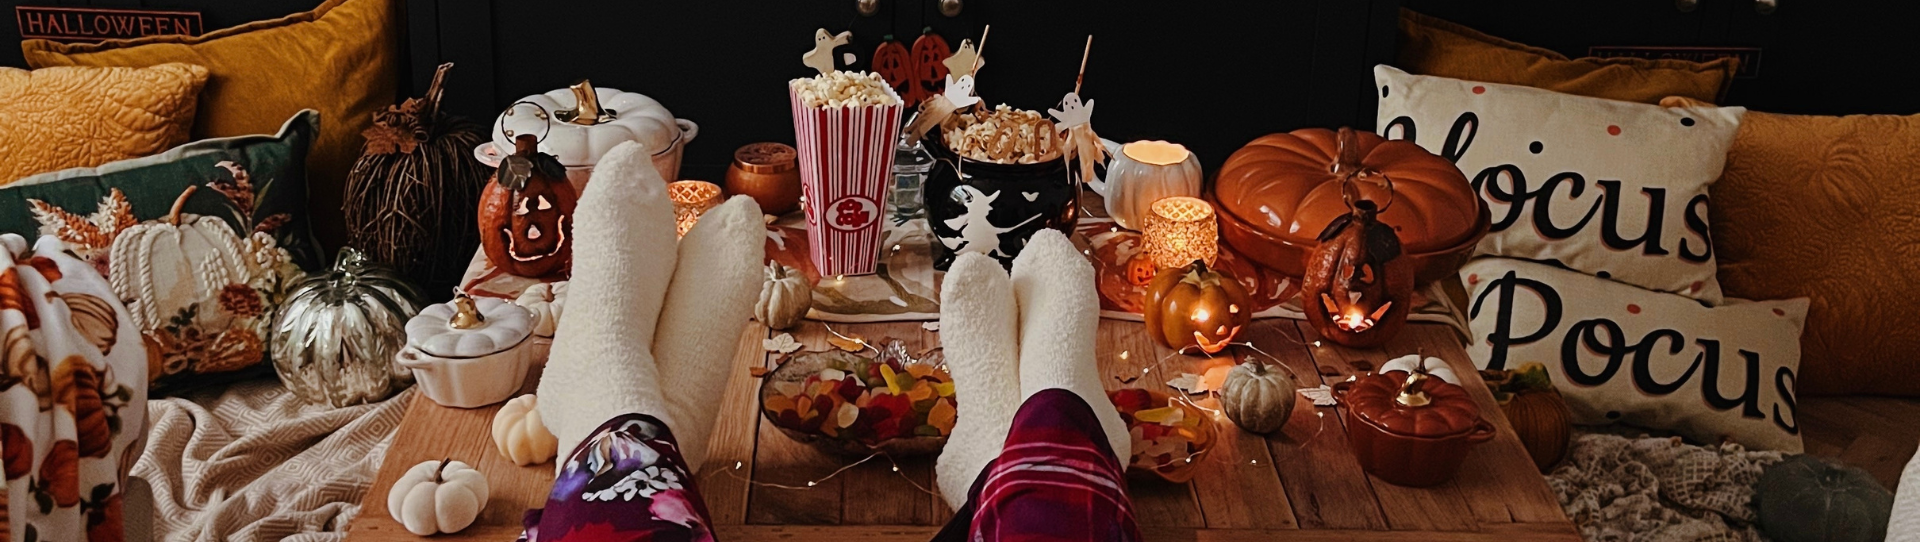 Halloween at Home: What To Wear to a Movie Marathon